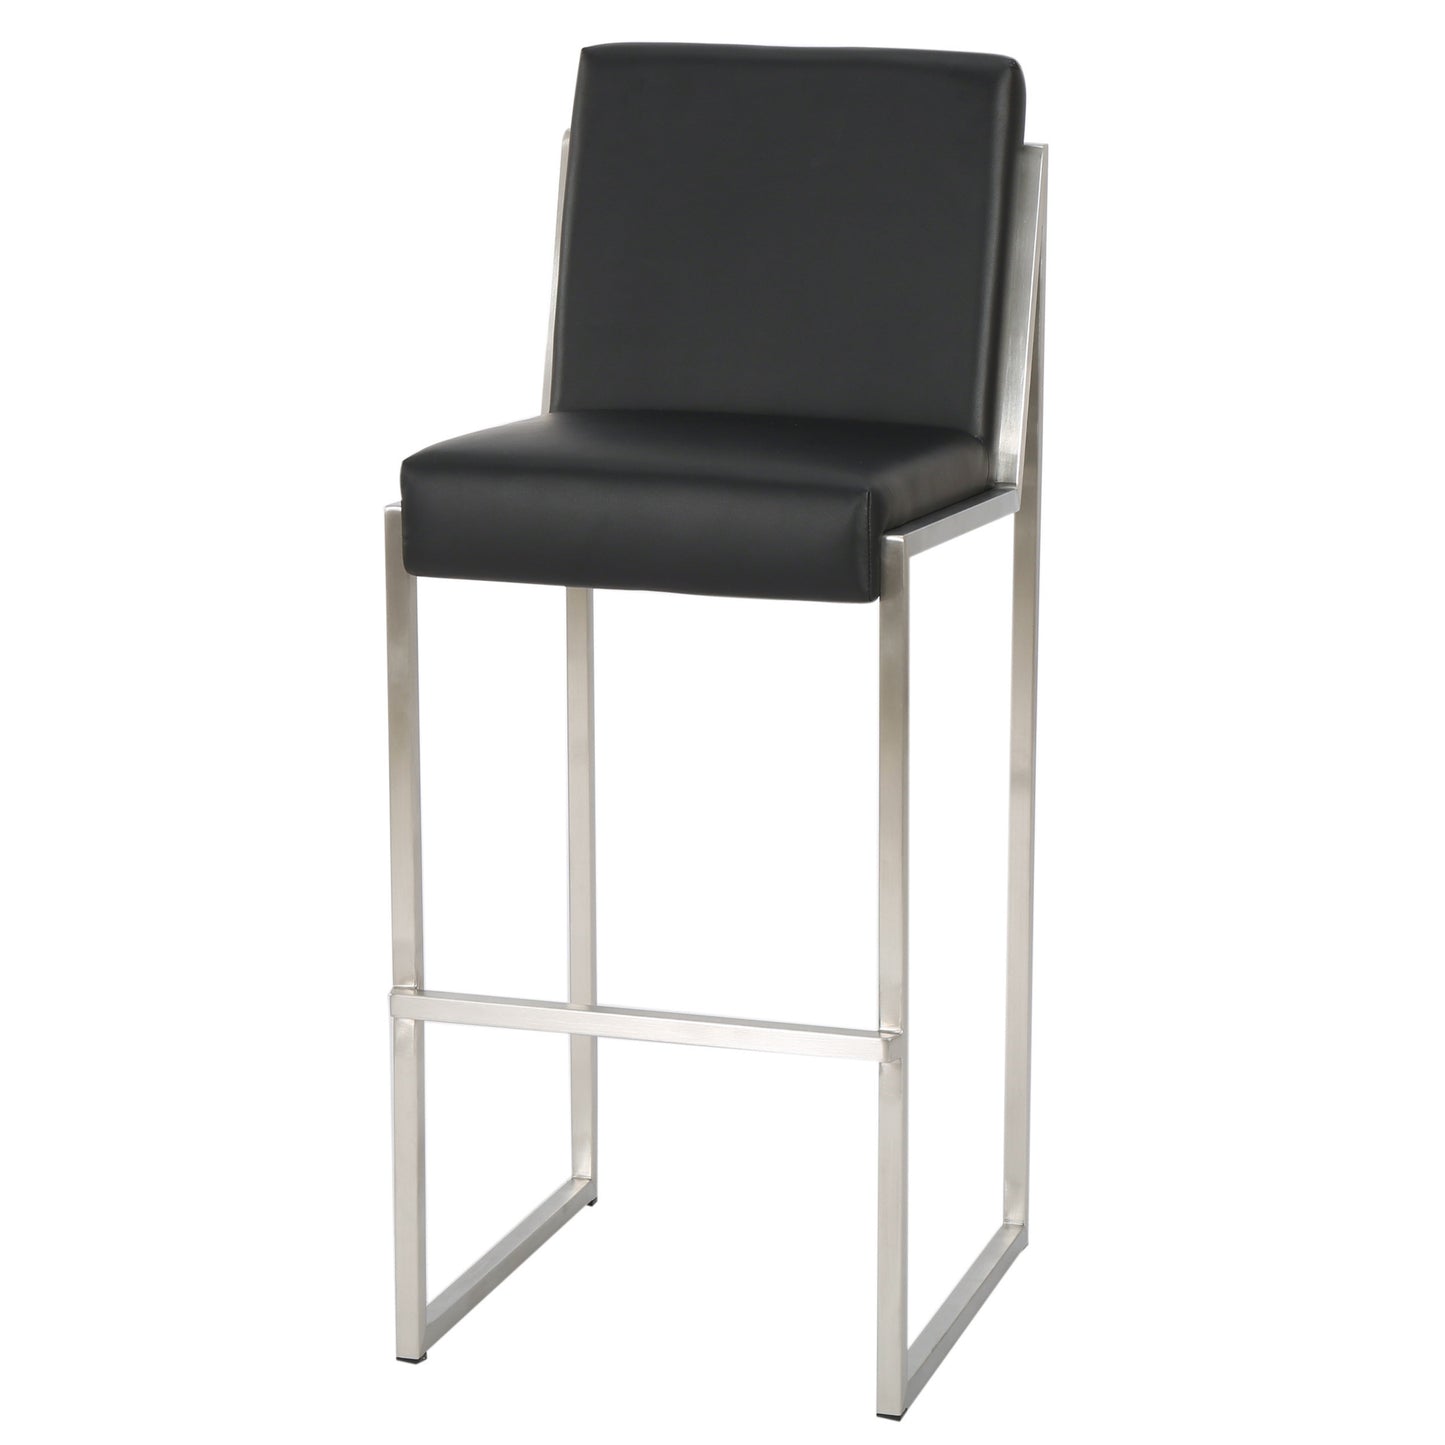 October 30-Inch Bonded Leather Barstool (Set of 2)